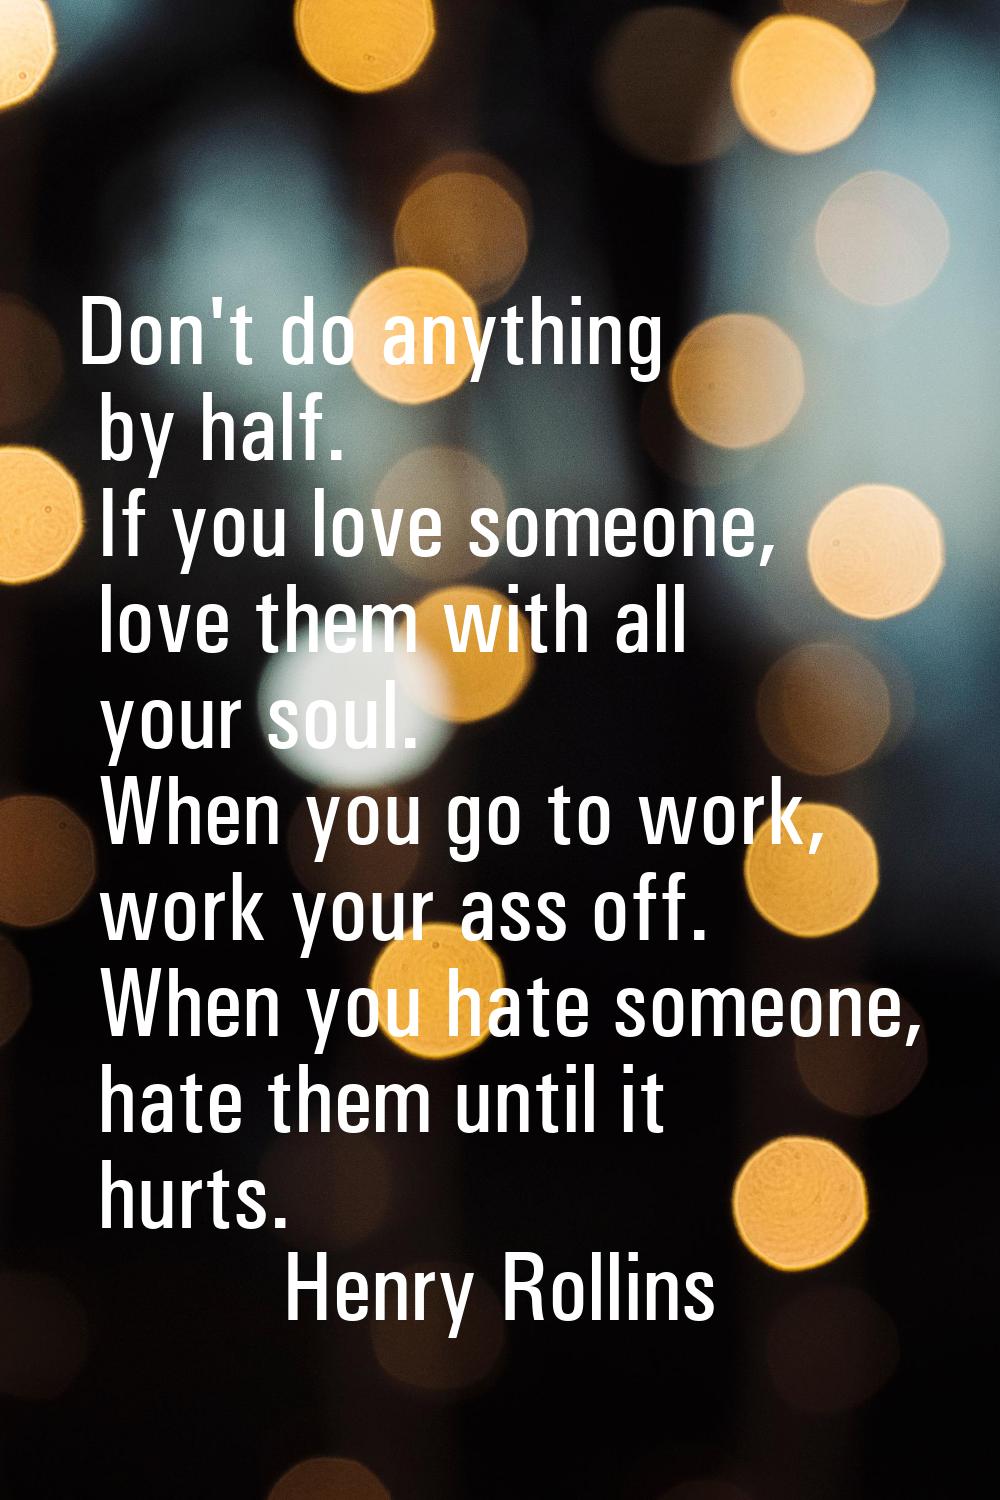 Don't do anything by half. If you love someone, love them with all your soul. When you go to work, 